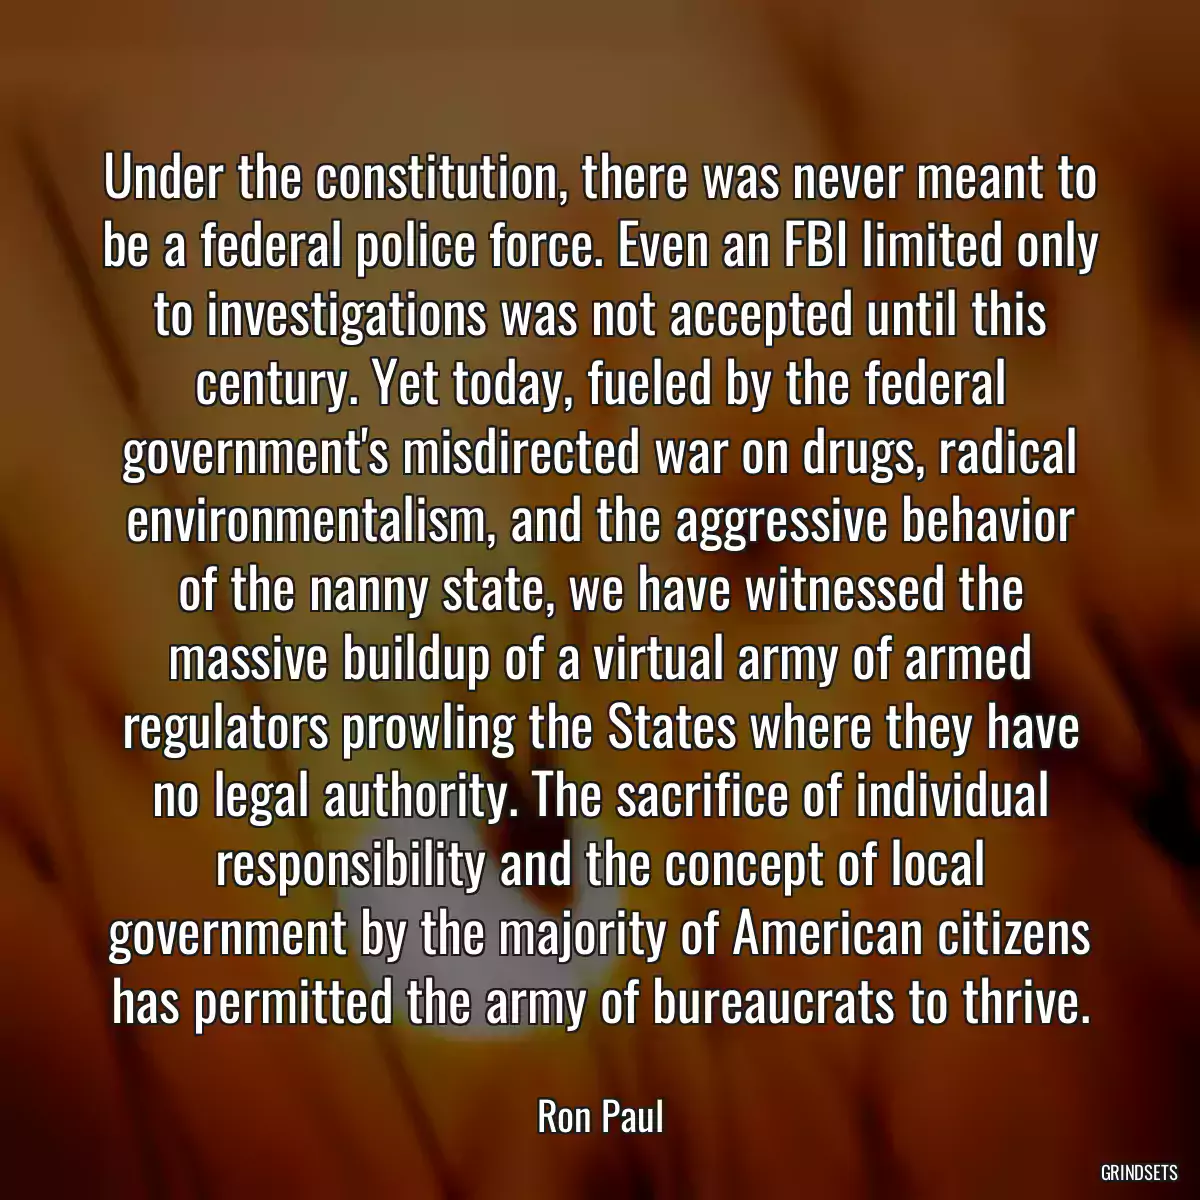 Under the constitution, there was never meant to be a federal police force. Even an FBI limited only to investigations was not accepted until this century. Yet today, fueled by the federal government\'s misdirected war on drugs, radical environmentalism, and the aggressive behavior of the nanny state, we have witnessed the massive buildup of a virtual army of armed regulators prowling the States where they have no legal authority. The sacrifice of individual responsibility and the concept of local government by the majority of American citizens has permitted the army of bureaucrats to thrive.